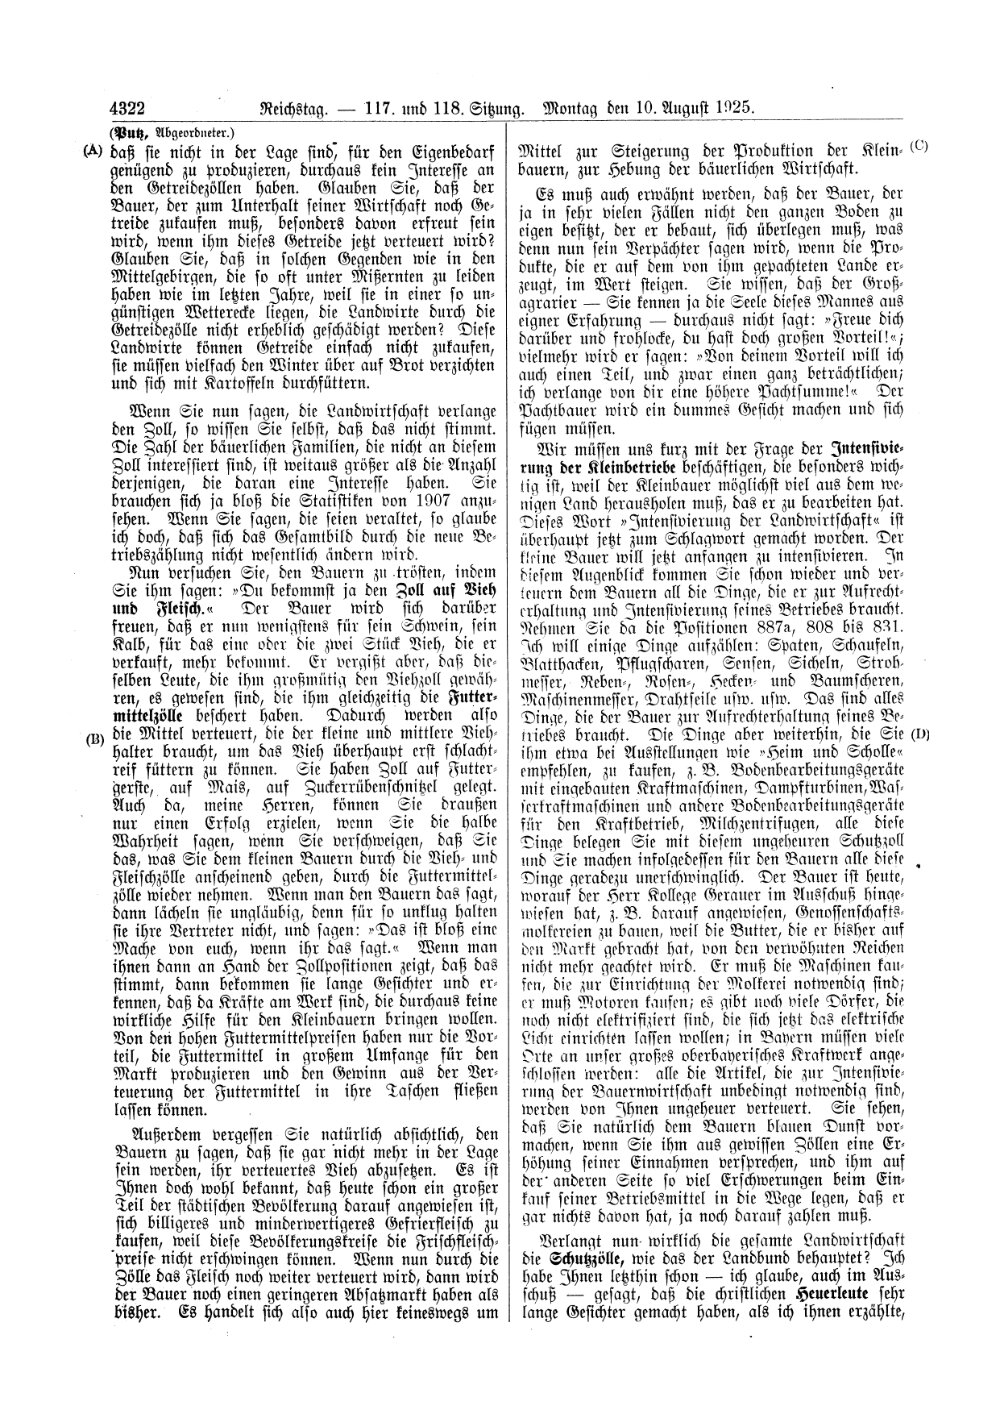 Scan of page 4322